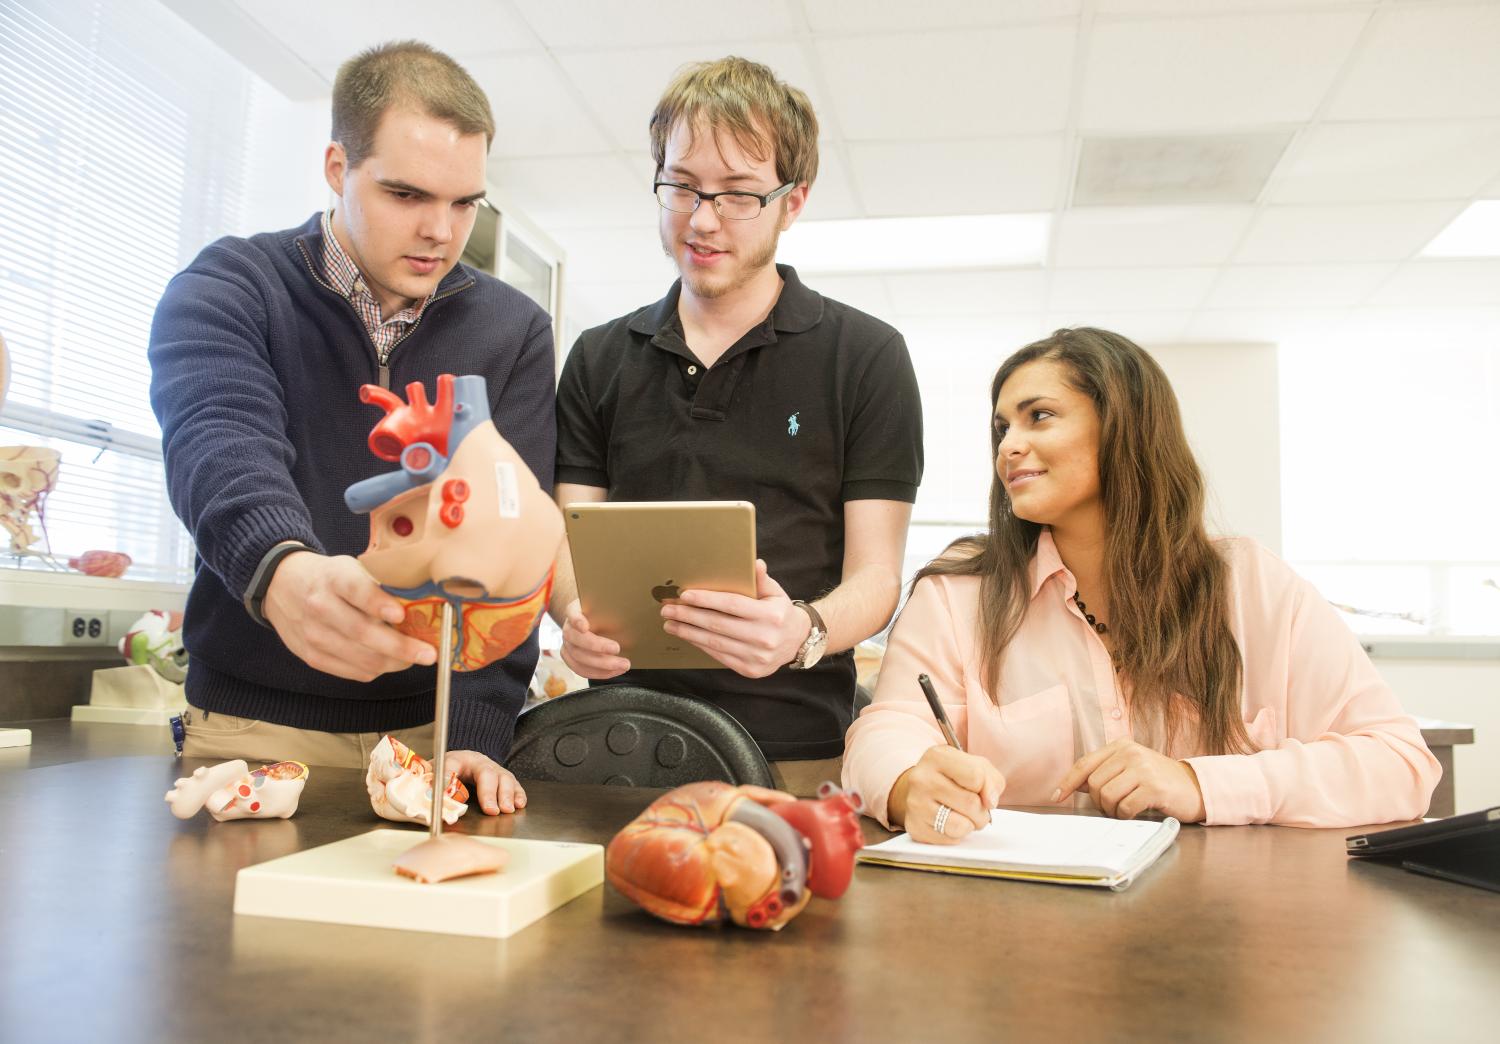 Students in lab looking at the anatomy of the heart.